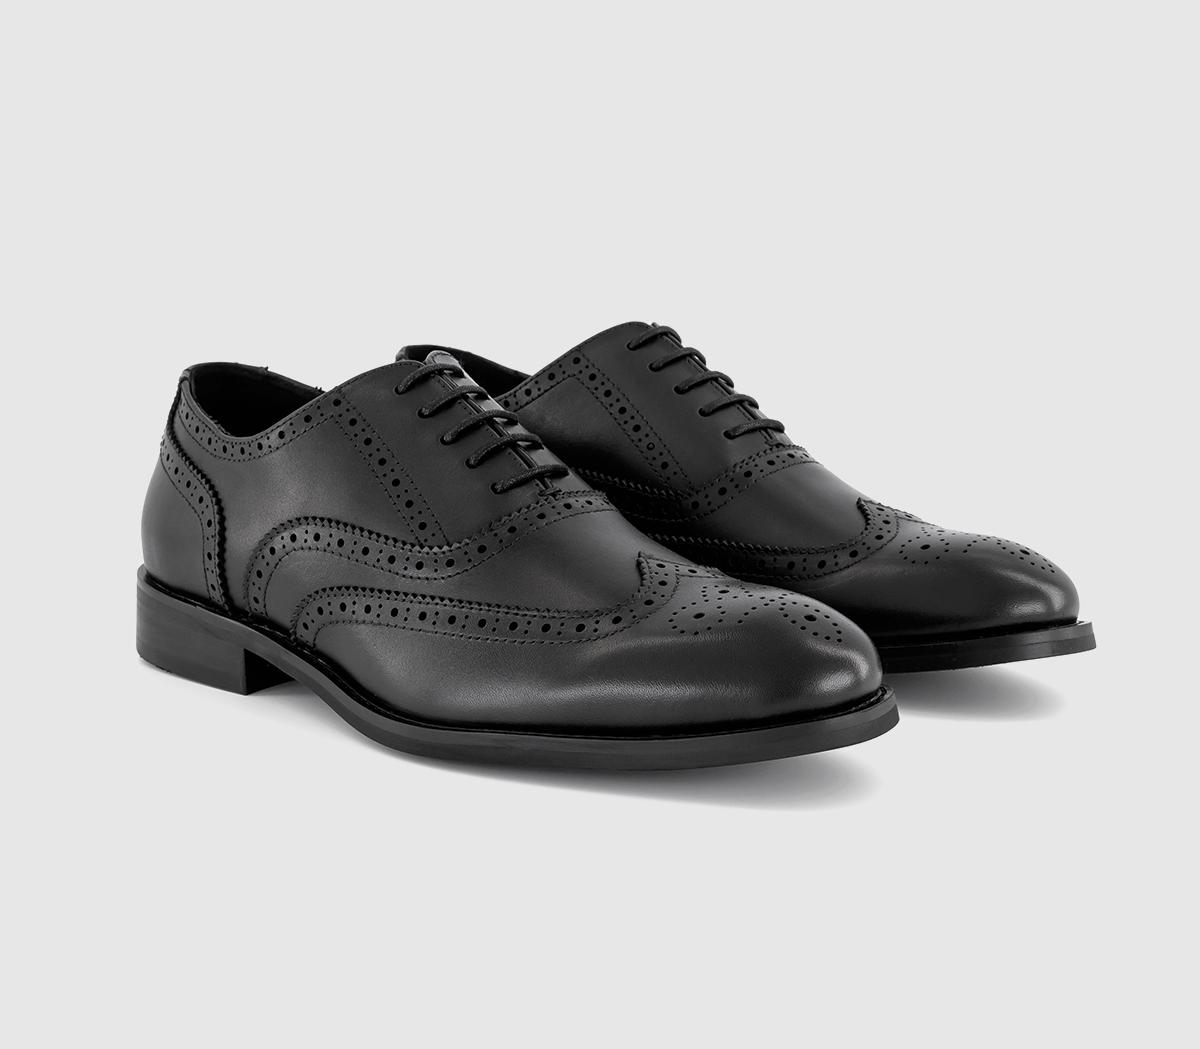 OFFICE Mens Milton Oxford Brogue Shoes Black Leather, 7